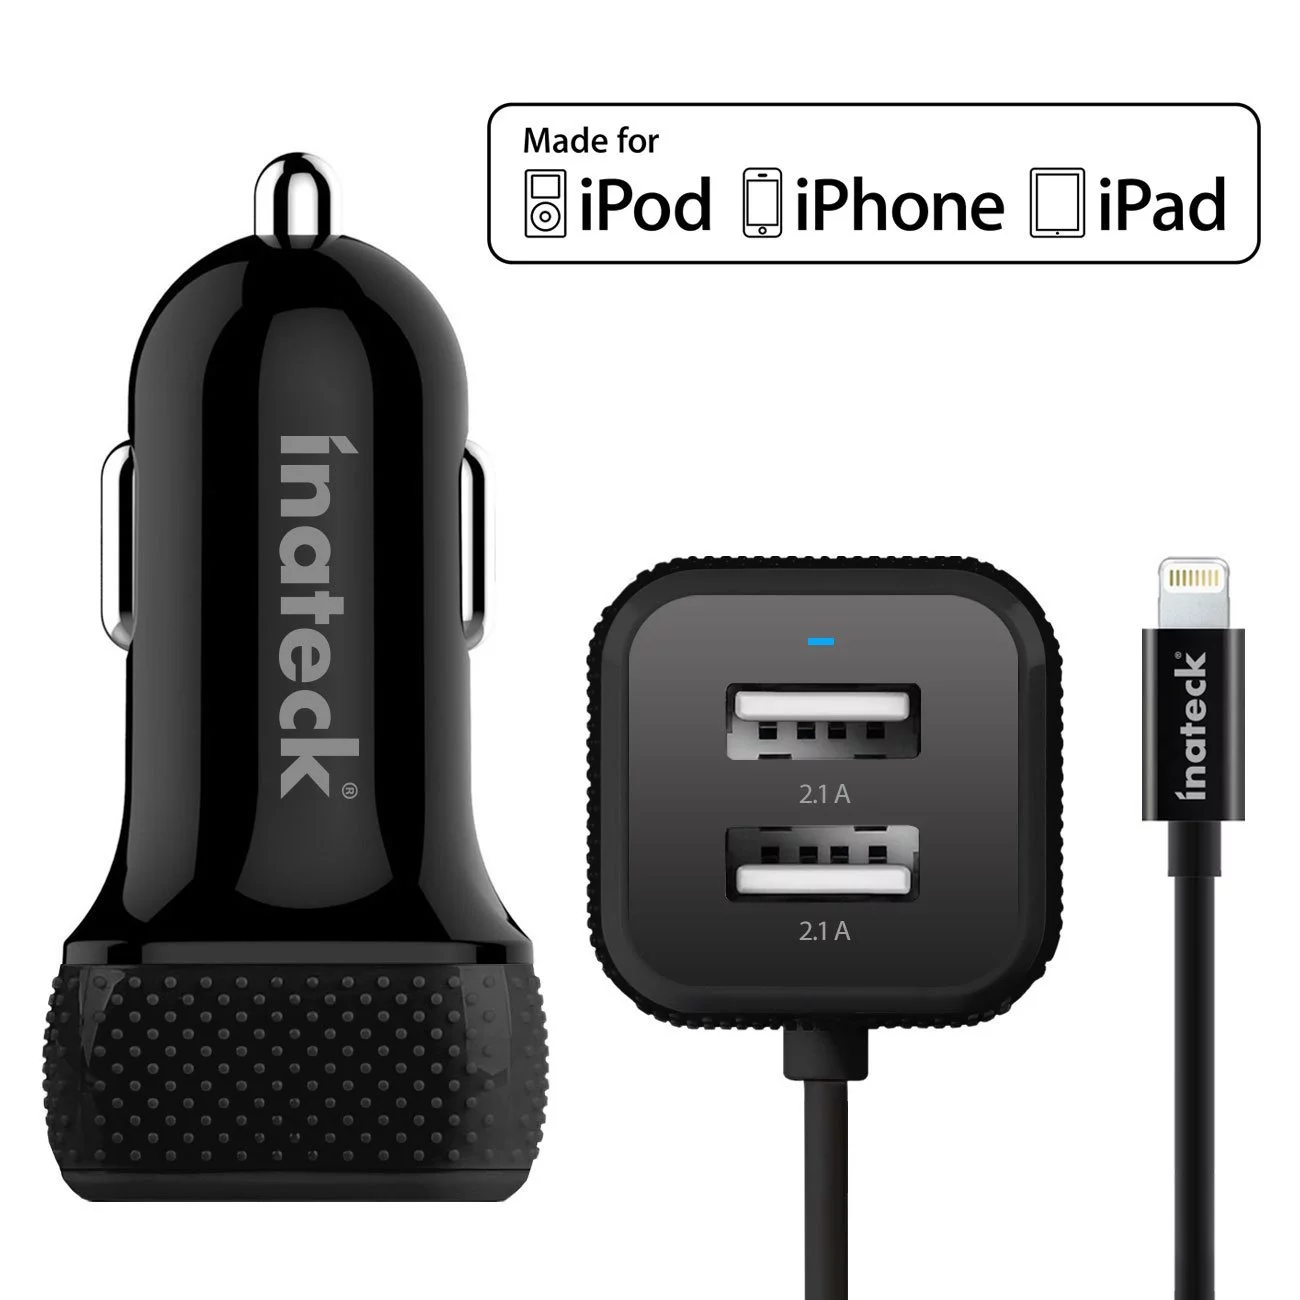 [Apple Certified] Inateck 33W 3-Port USB Car Charger (2.1A USB Port x 2 + 2.4A Built in Lightning Cable) with Intelligent Charging Technology for iPhone, iPad, Samsung Galaxy S6, Included a 1.2m/ 4ft Micro USB Cable - Black